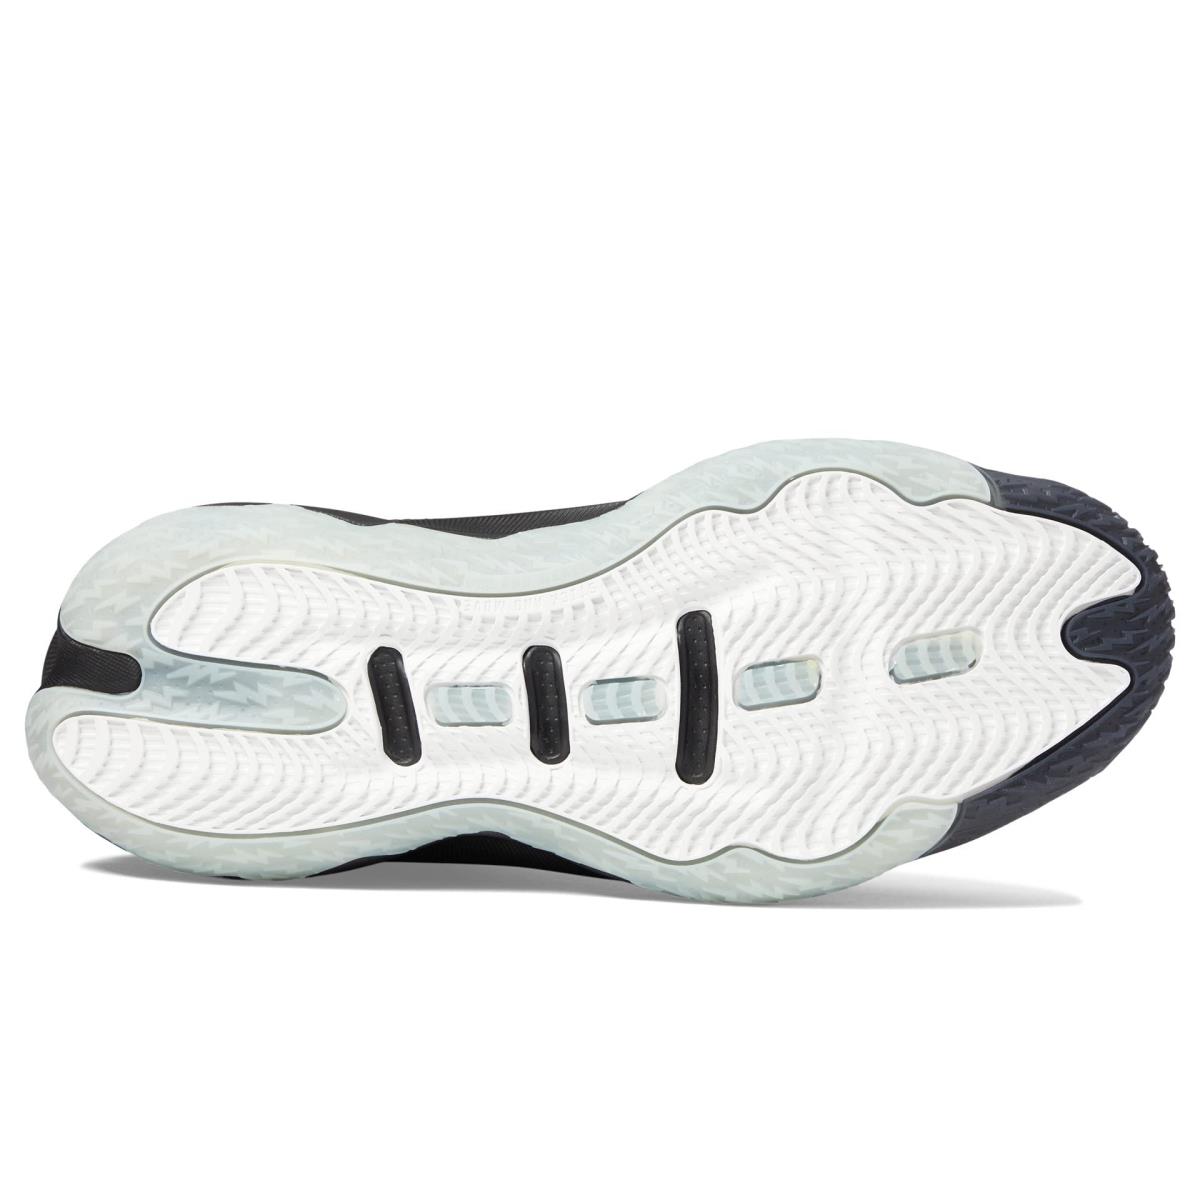 Adidas Unisex-adult The Road Cycling Shoes Sneaker Black/White/Grey